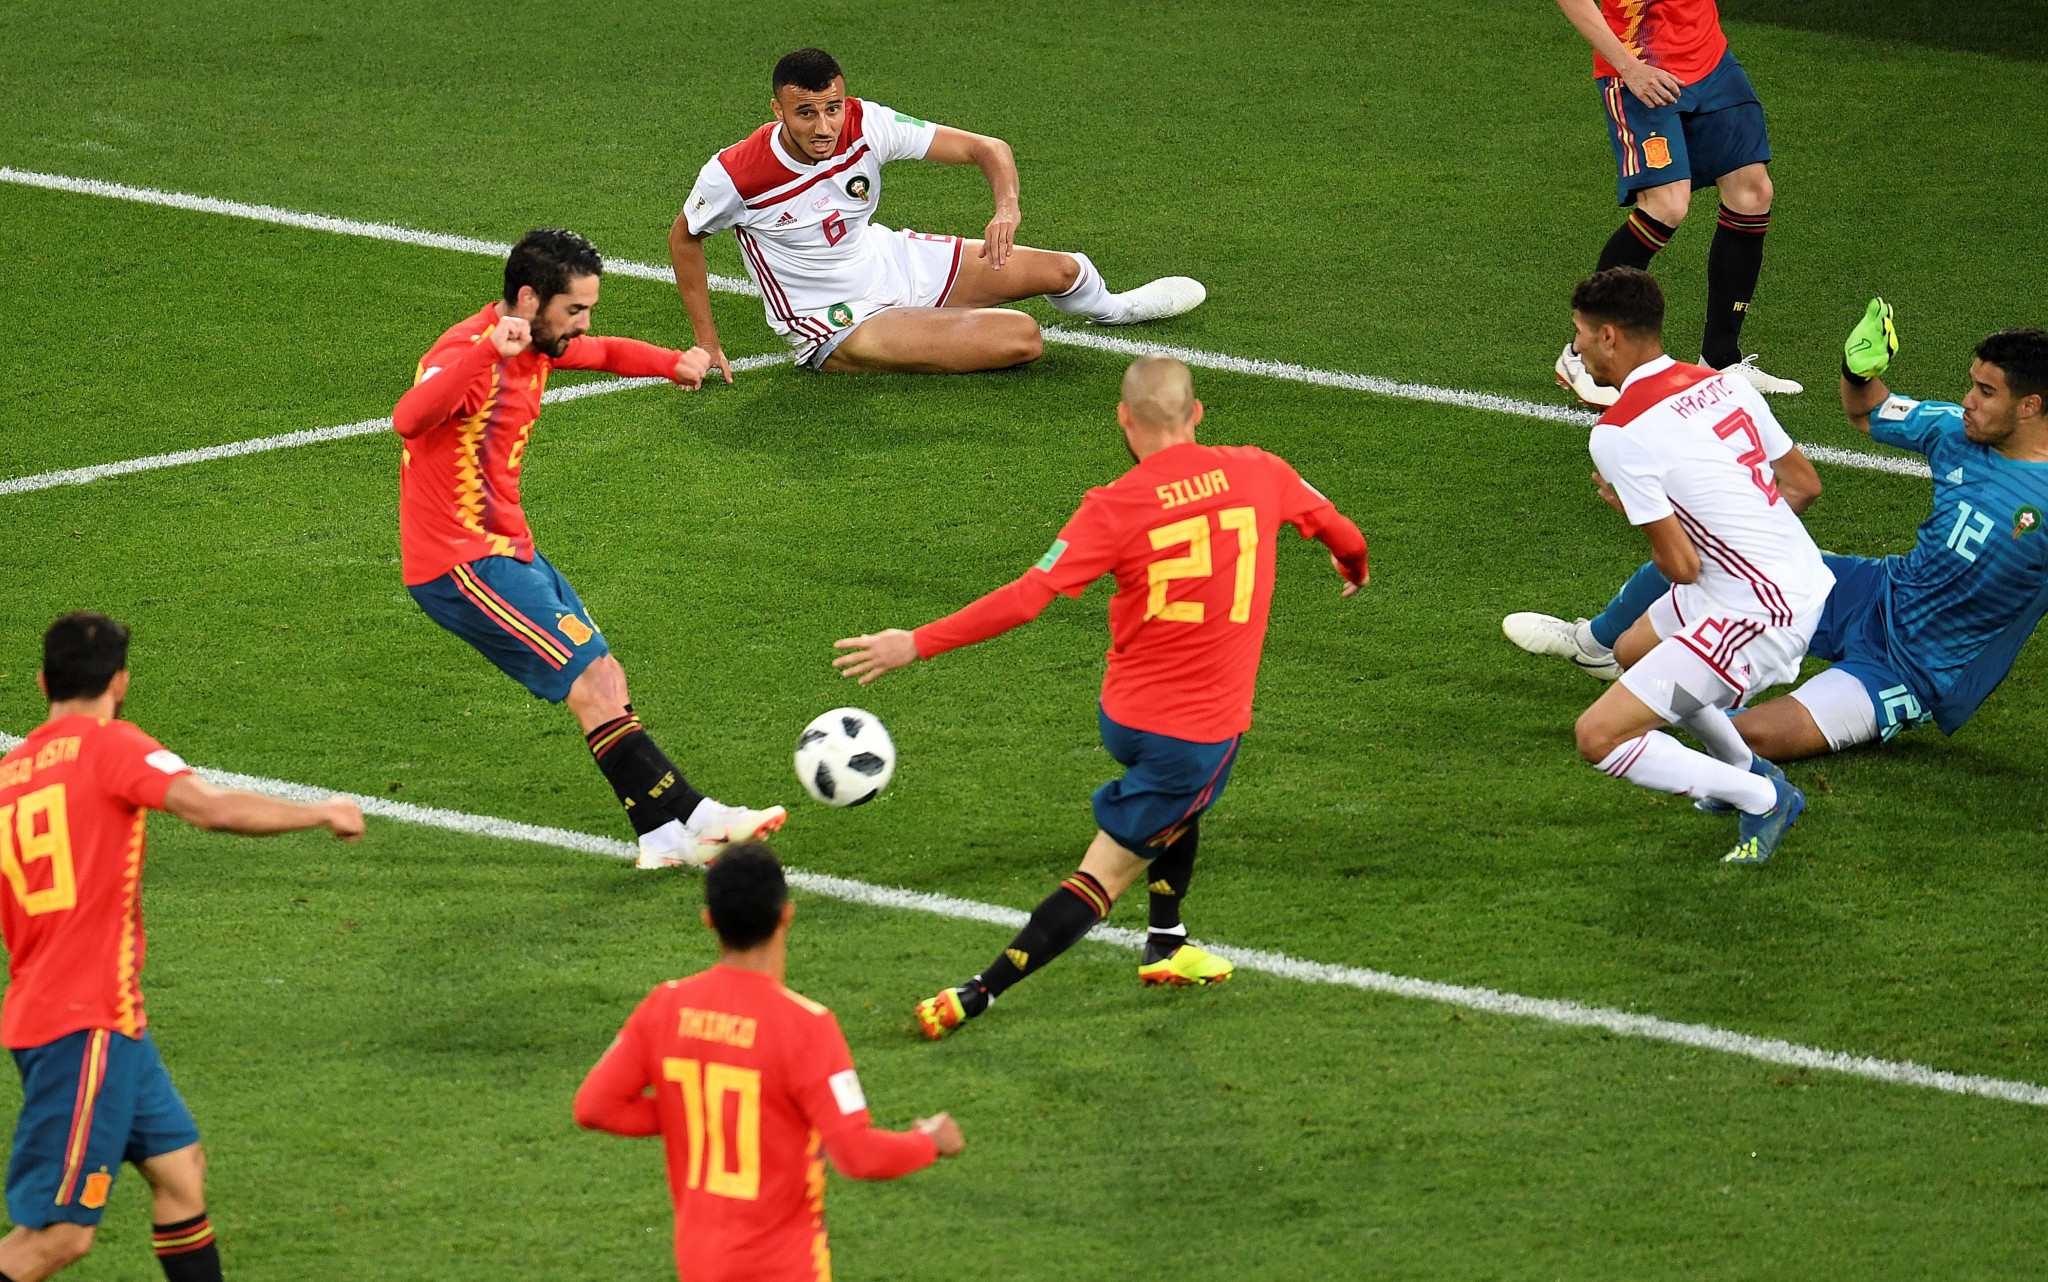 Isco rounded off a well-worked goal to equalise for Spain in their dramatic clash with Morocco ©Getty Images